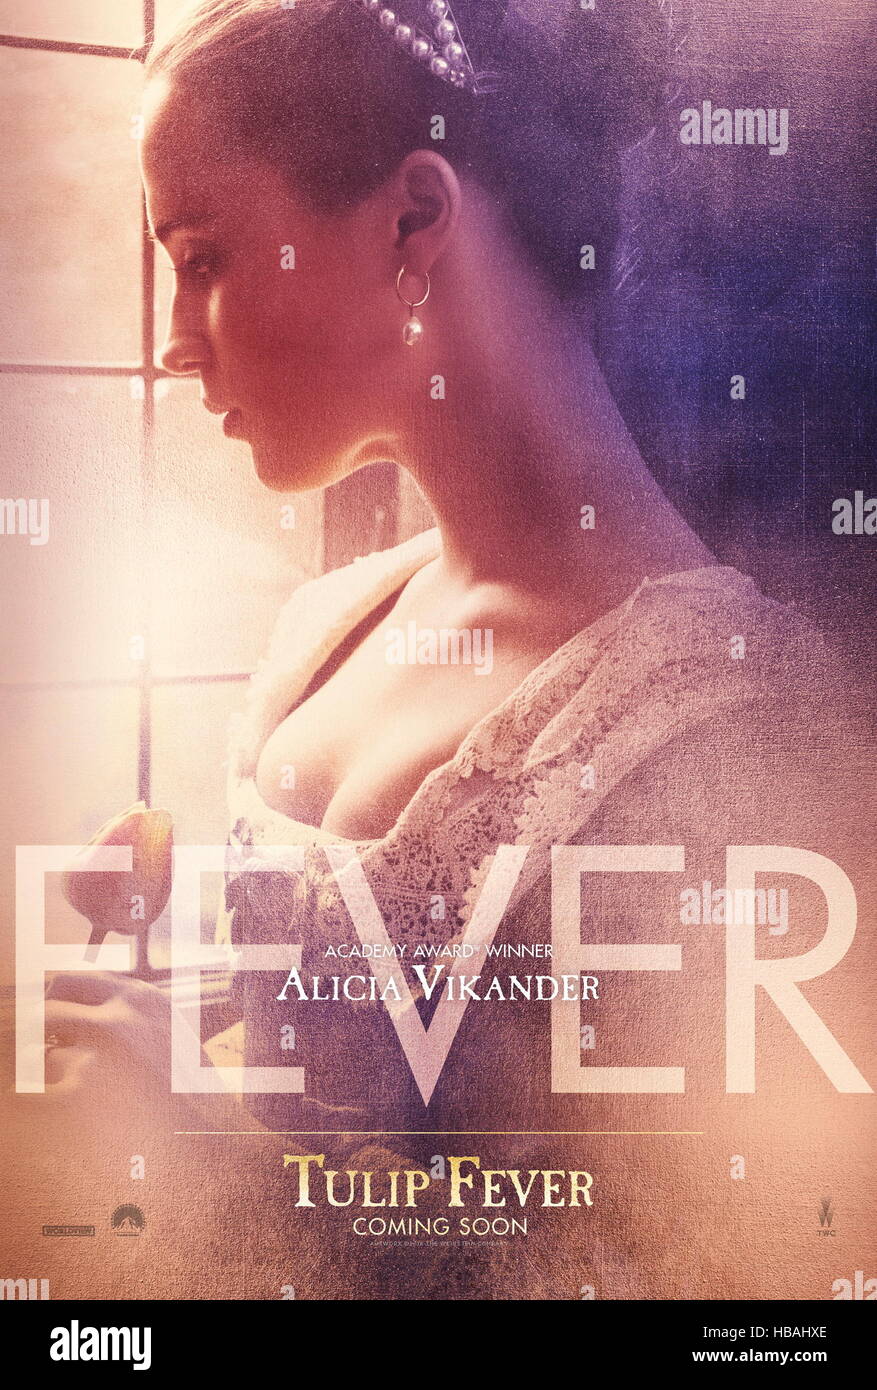 RELEASE DATE: February 24, 2017 TITLE: Tulip Fever STUDIO: Weinstein Company DIRECTOR: Justin Chadwick PLOT: An artist falls for a young married woman while he's commissioned to paint her portrait during the Tulip mania of 17th century Amsterdam STARRING:  Alicia Vikander (Credit: c Magnolia Pictures/Entertainment Pictures/) Stock Photo